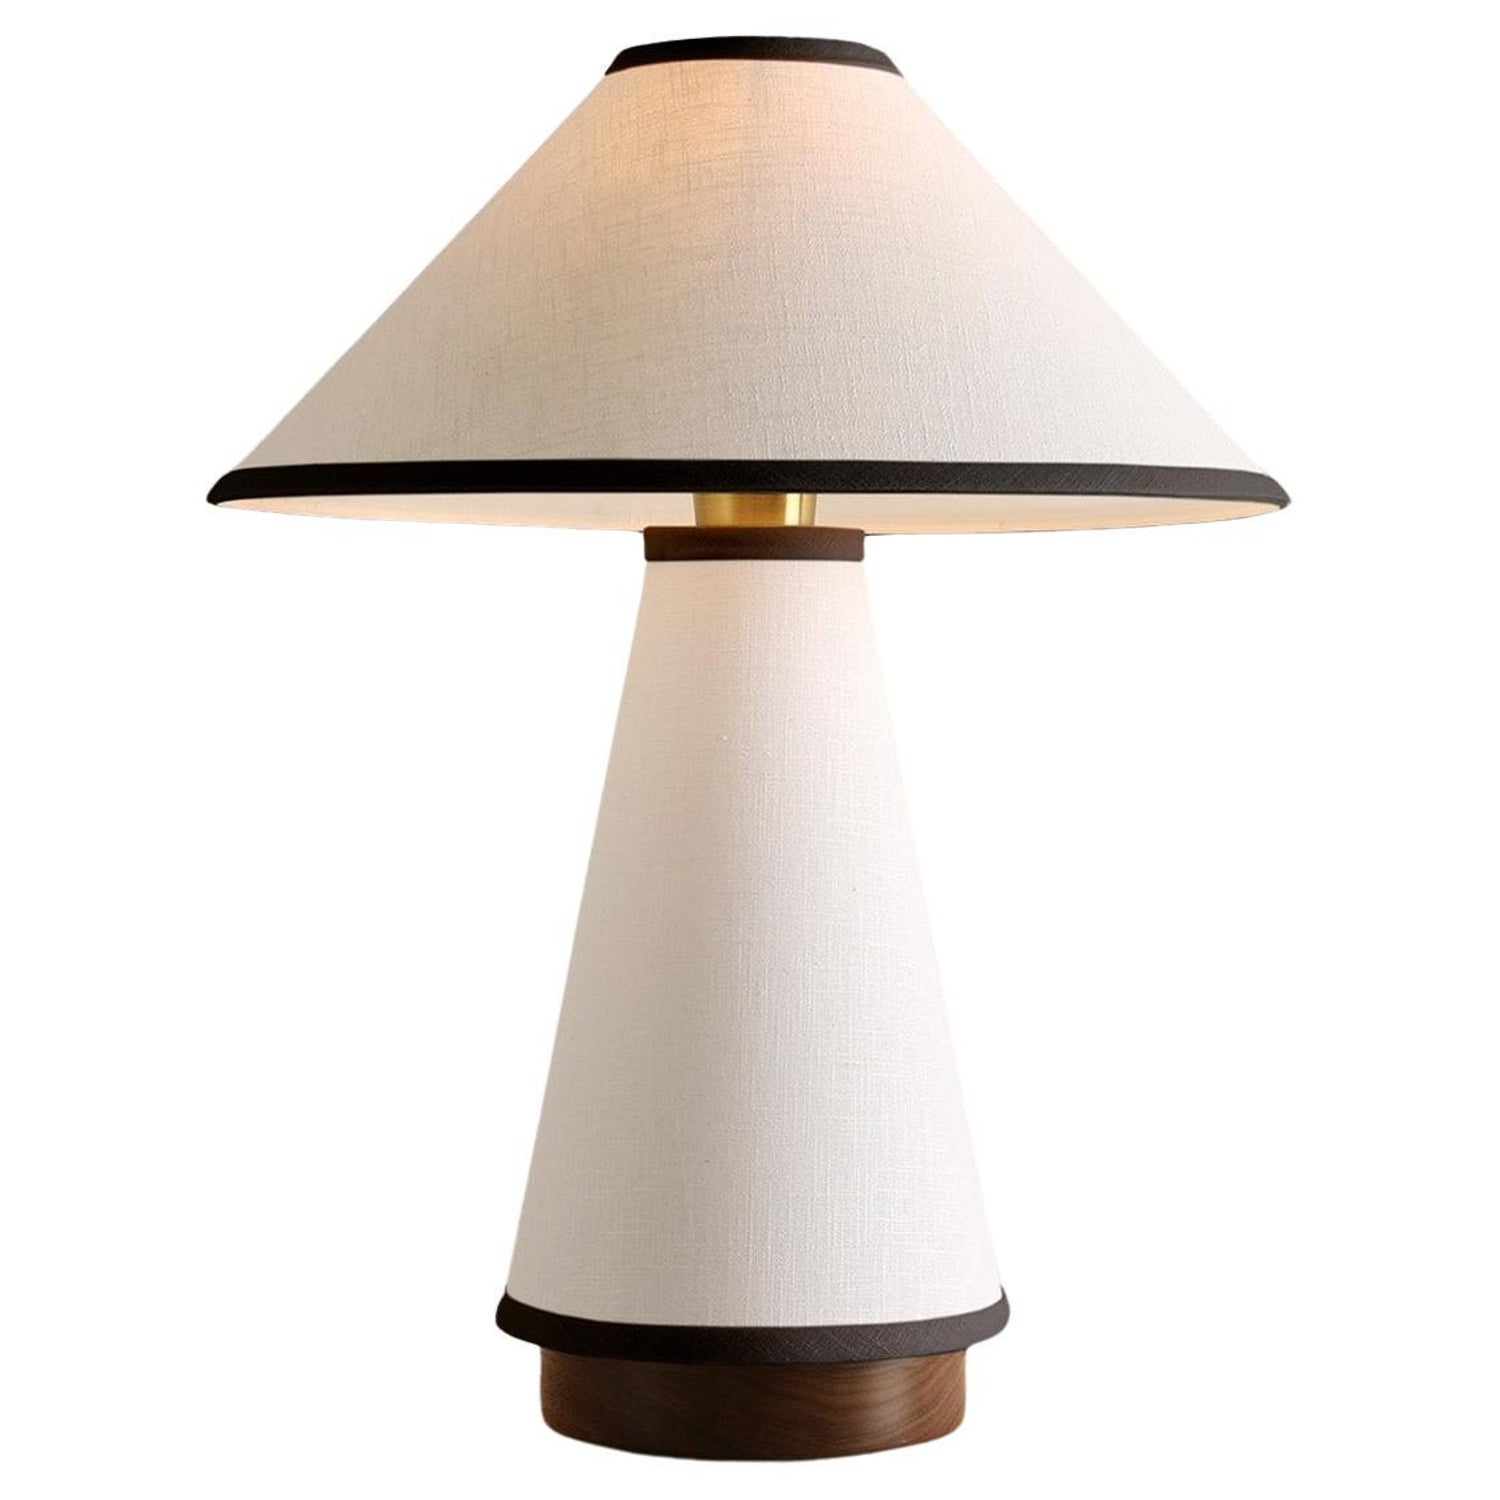 Linden Table Lamp, with Narrow Top Shade and Cream and Black